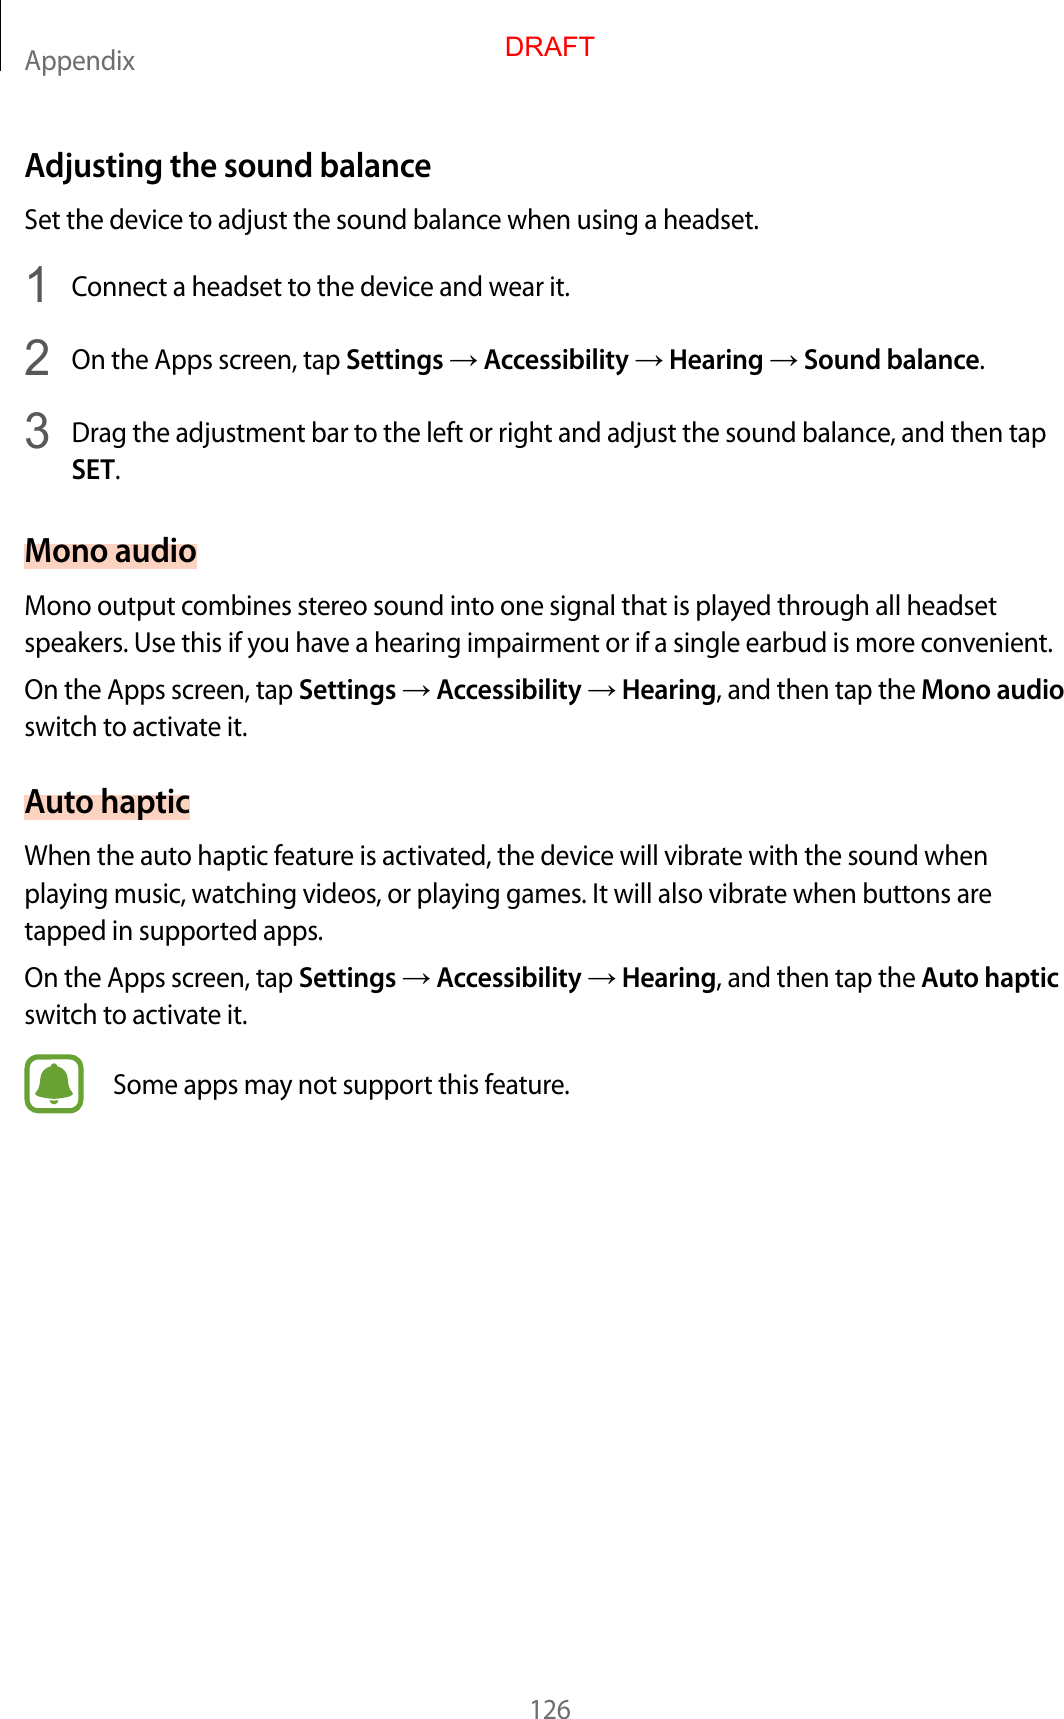 Appendix126Adjusting the sound balanceSet the device to adjust the sound balance when using a headset.1  Connect a headset to the device and wear it.2  On the Apps screen, tap Settings  Accessibility  Hearing  Sound balance.3  Drag the adjustment bar to the left or right and adjust the sound balance, and then tapSET.Mono audioMono output combines stereo sound into one signal that is played through all headset speakers. Use this if you have a hearing impairment or if a single earbud is more convenient.On the Apps screen, tap Settings  Accessibility  Hearing, and then tap the Mono audio switch to activate it.Auto hapticWhen the auto haptic feature is activated, the device will vibrate with the sound when playing music, watching videos, or playing games. It will also vibrate when buttons are tapped in supported apps.On the Apps screen, tap Settings  Accessibility  Hearing, and then tap the Auto haptic switch to activate it.Some apps may not support this feature.DRAFT